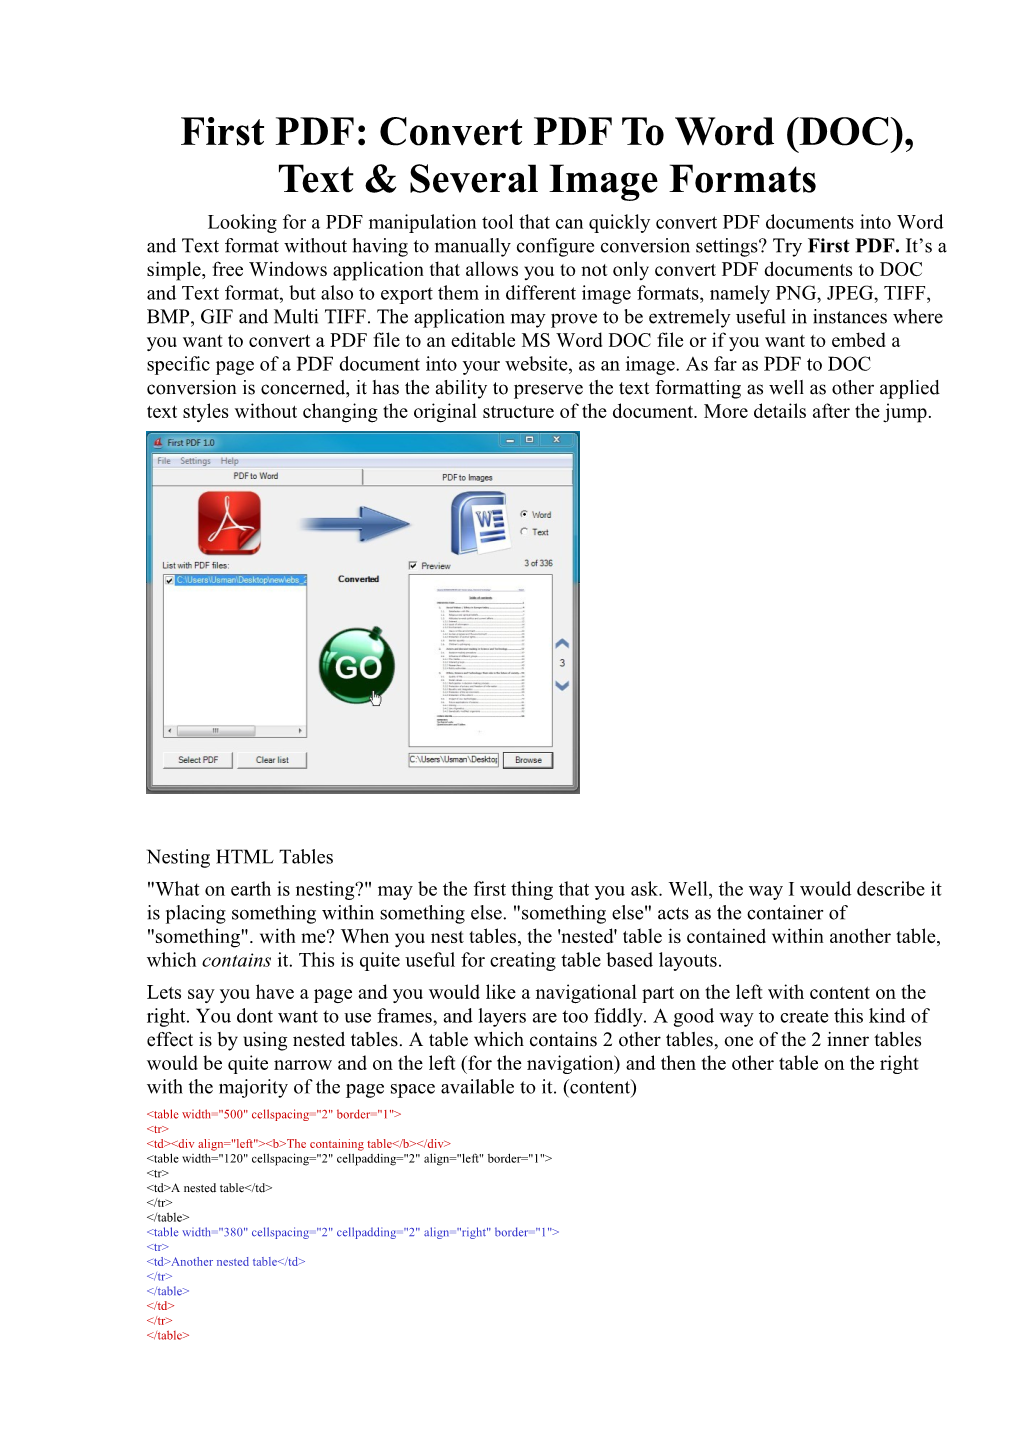 First PDF: Convert PDF to Word (DOC), Text & Several Image Formats